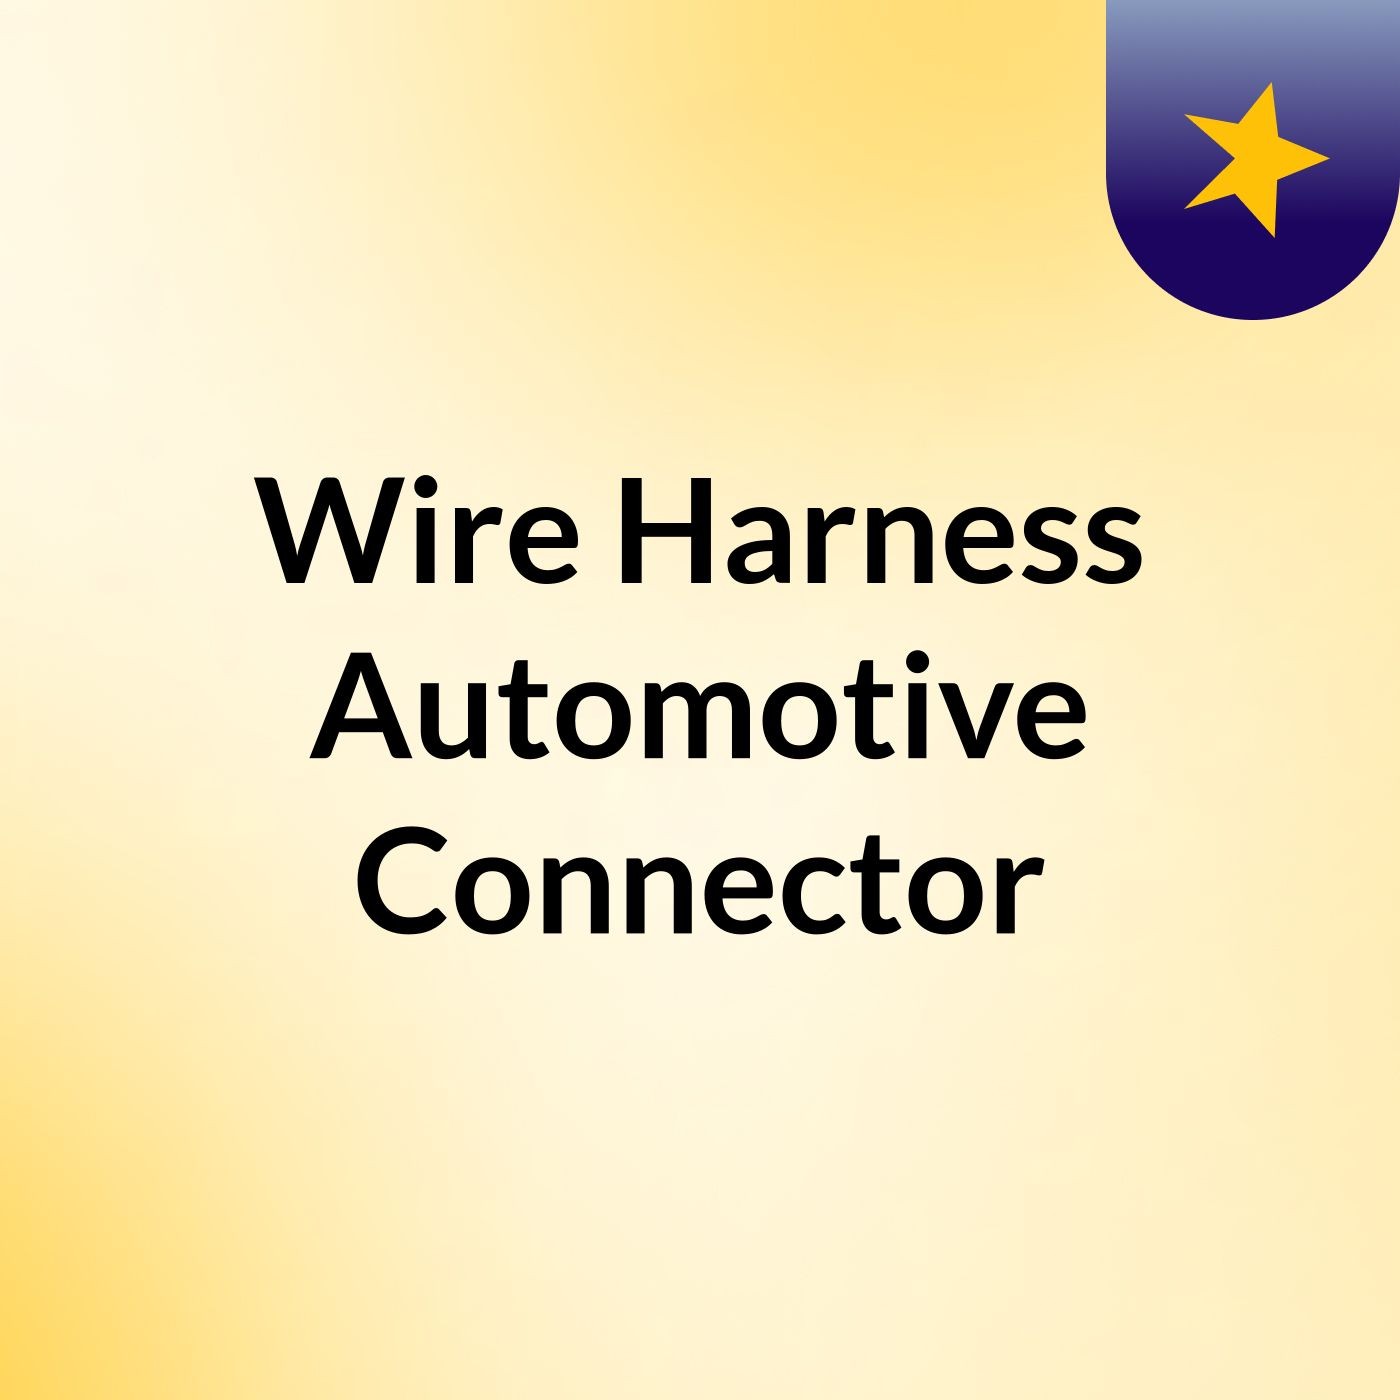 Wire Harness,Automotive Connector,